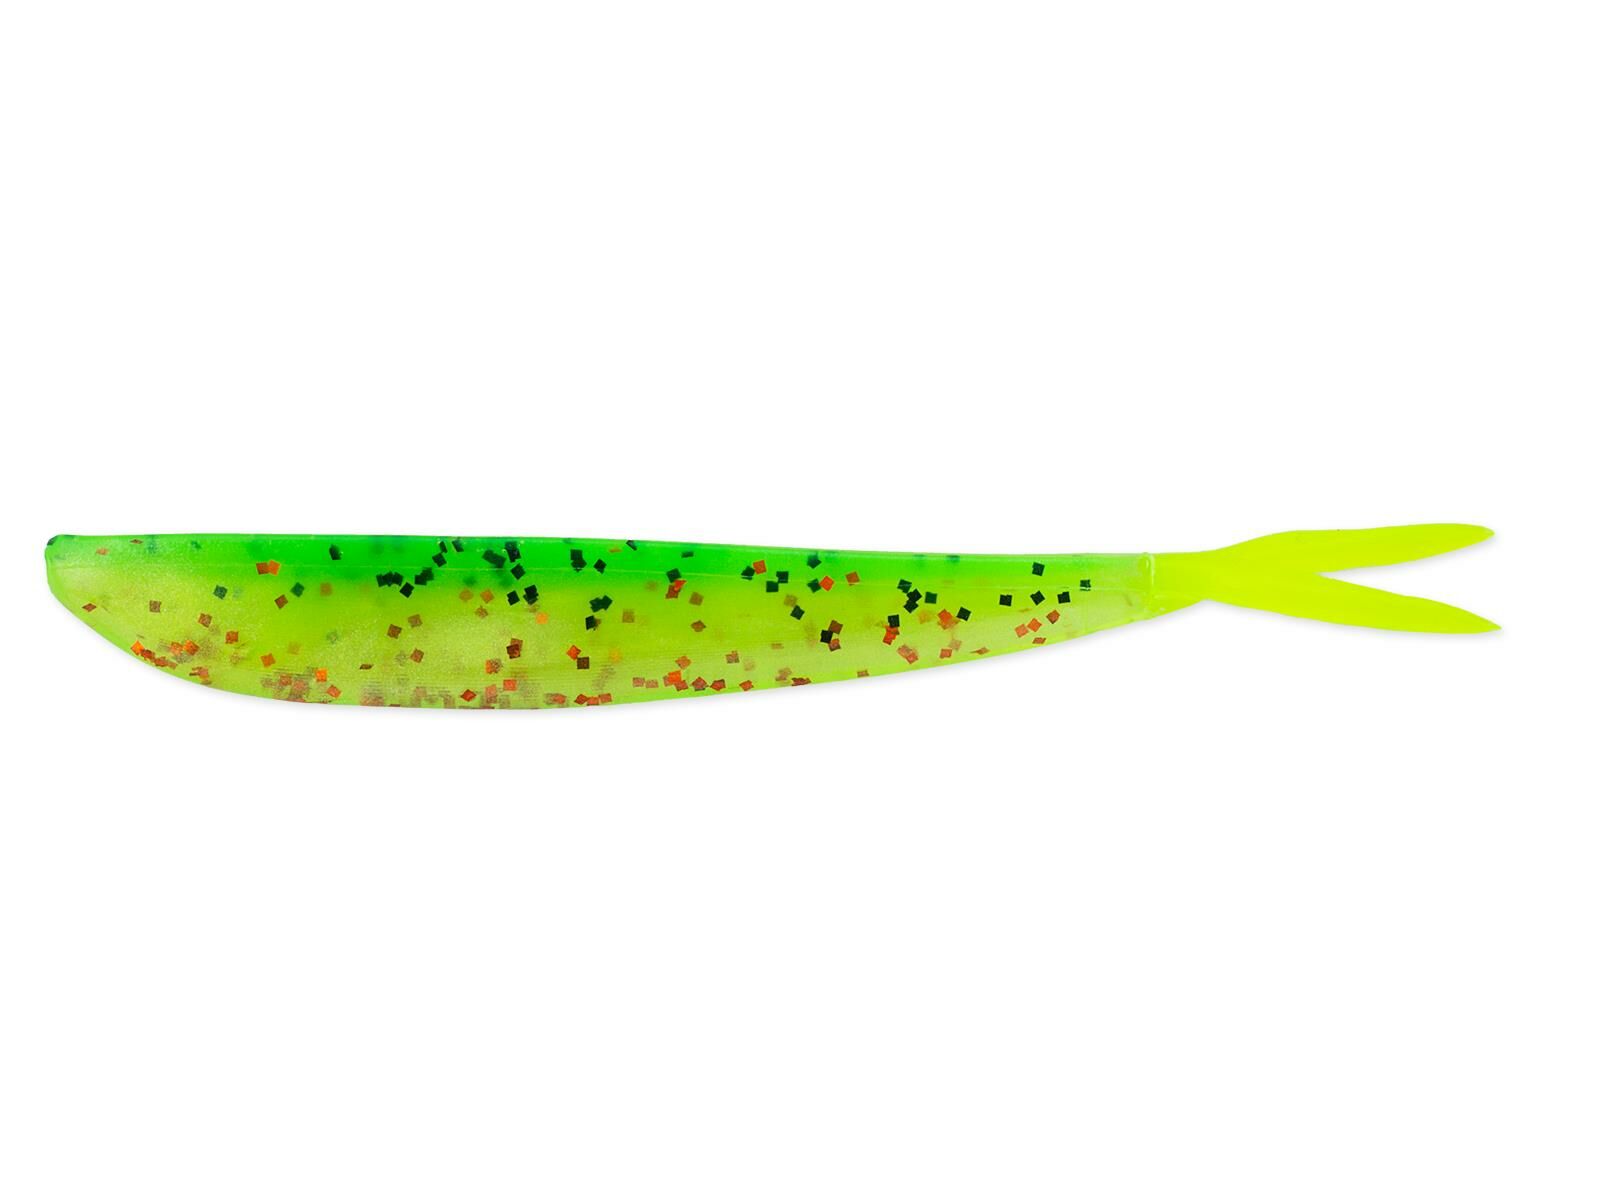 4" Fin-S Fish (Tail Colors) - Fire Tiger CT